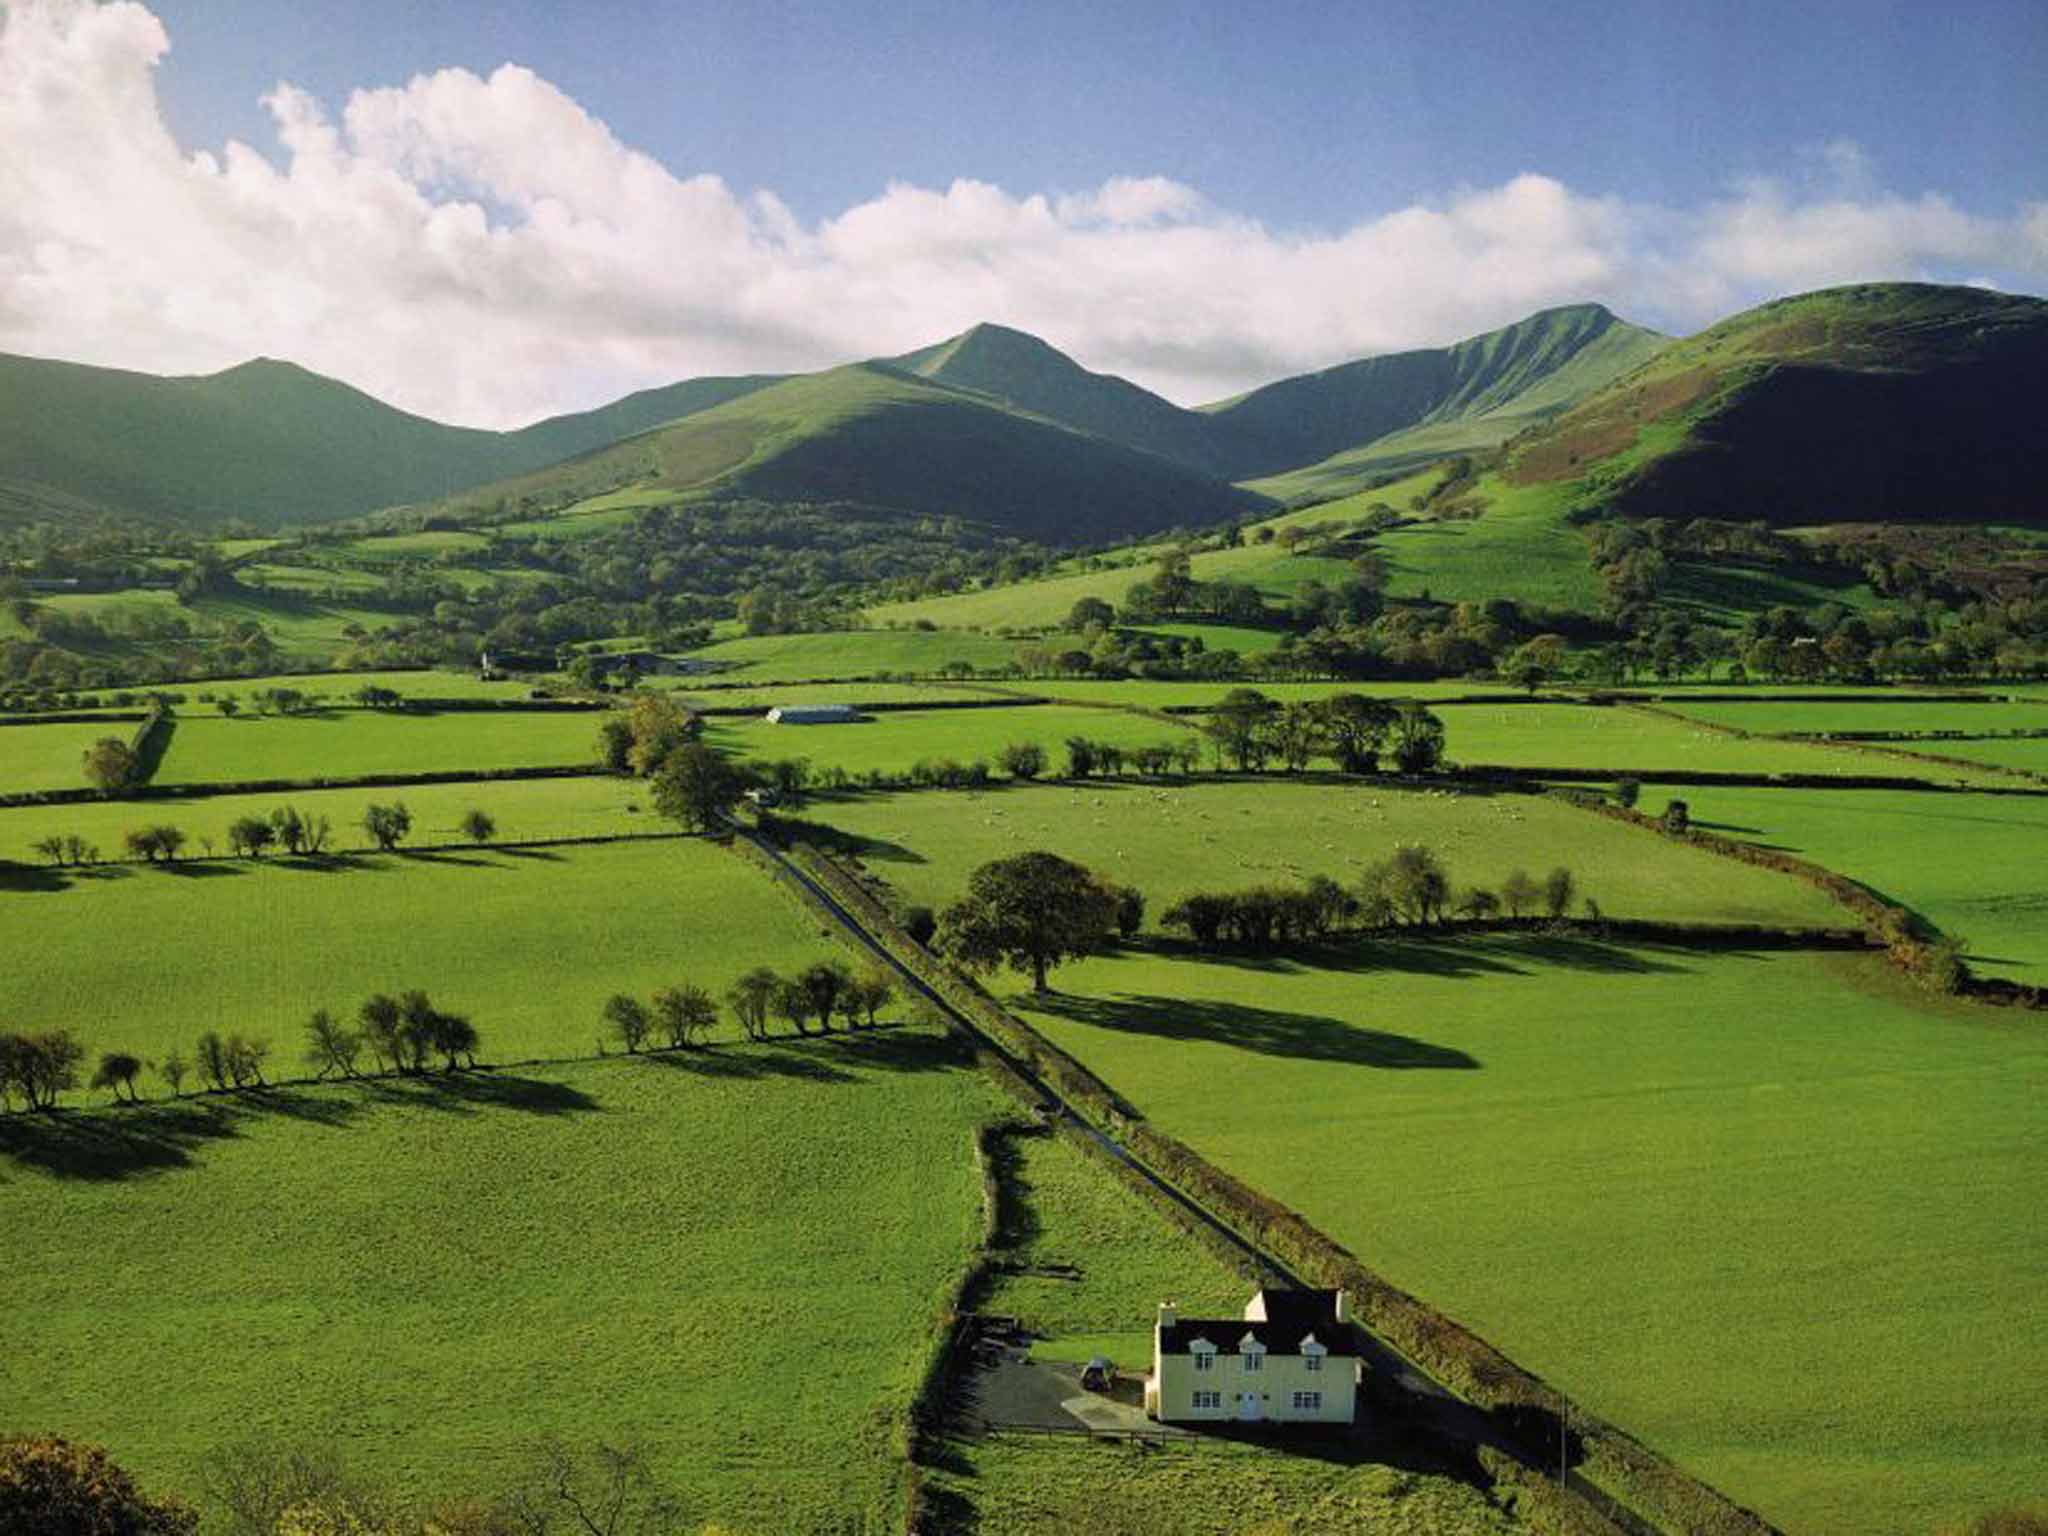 Brecon Beacons: National Parks Week 2015 starts on 27 July